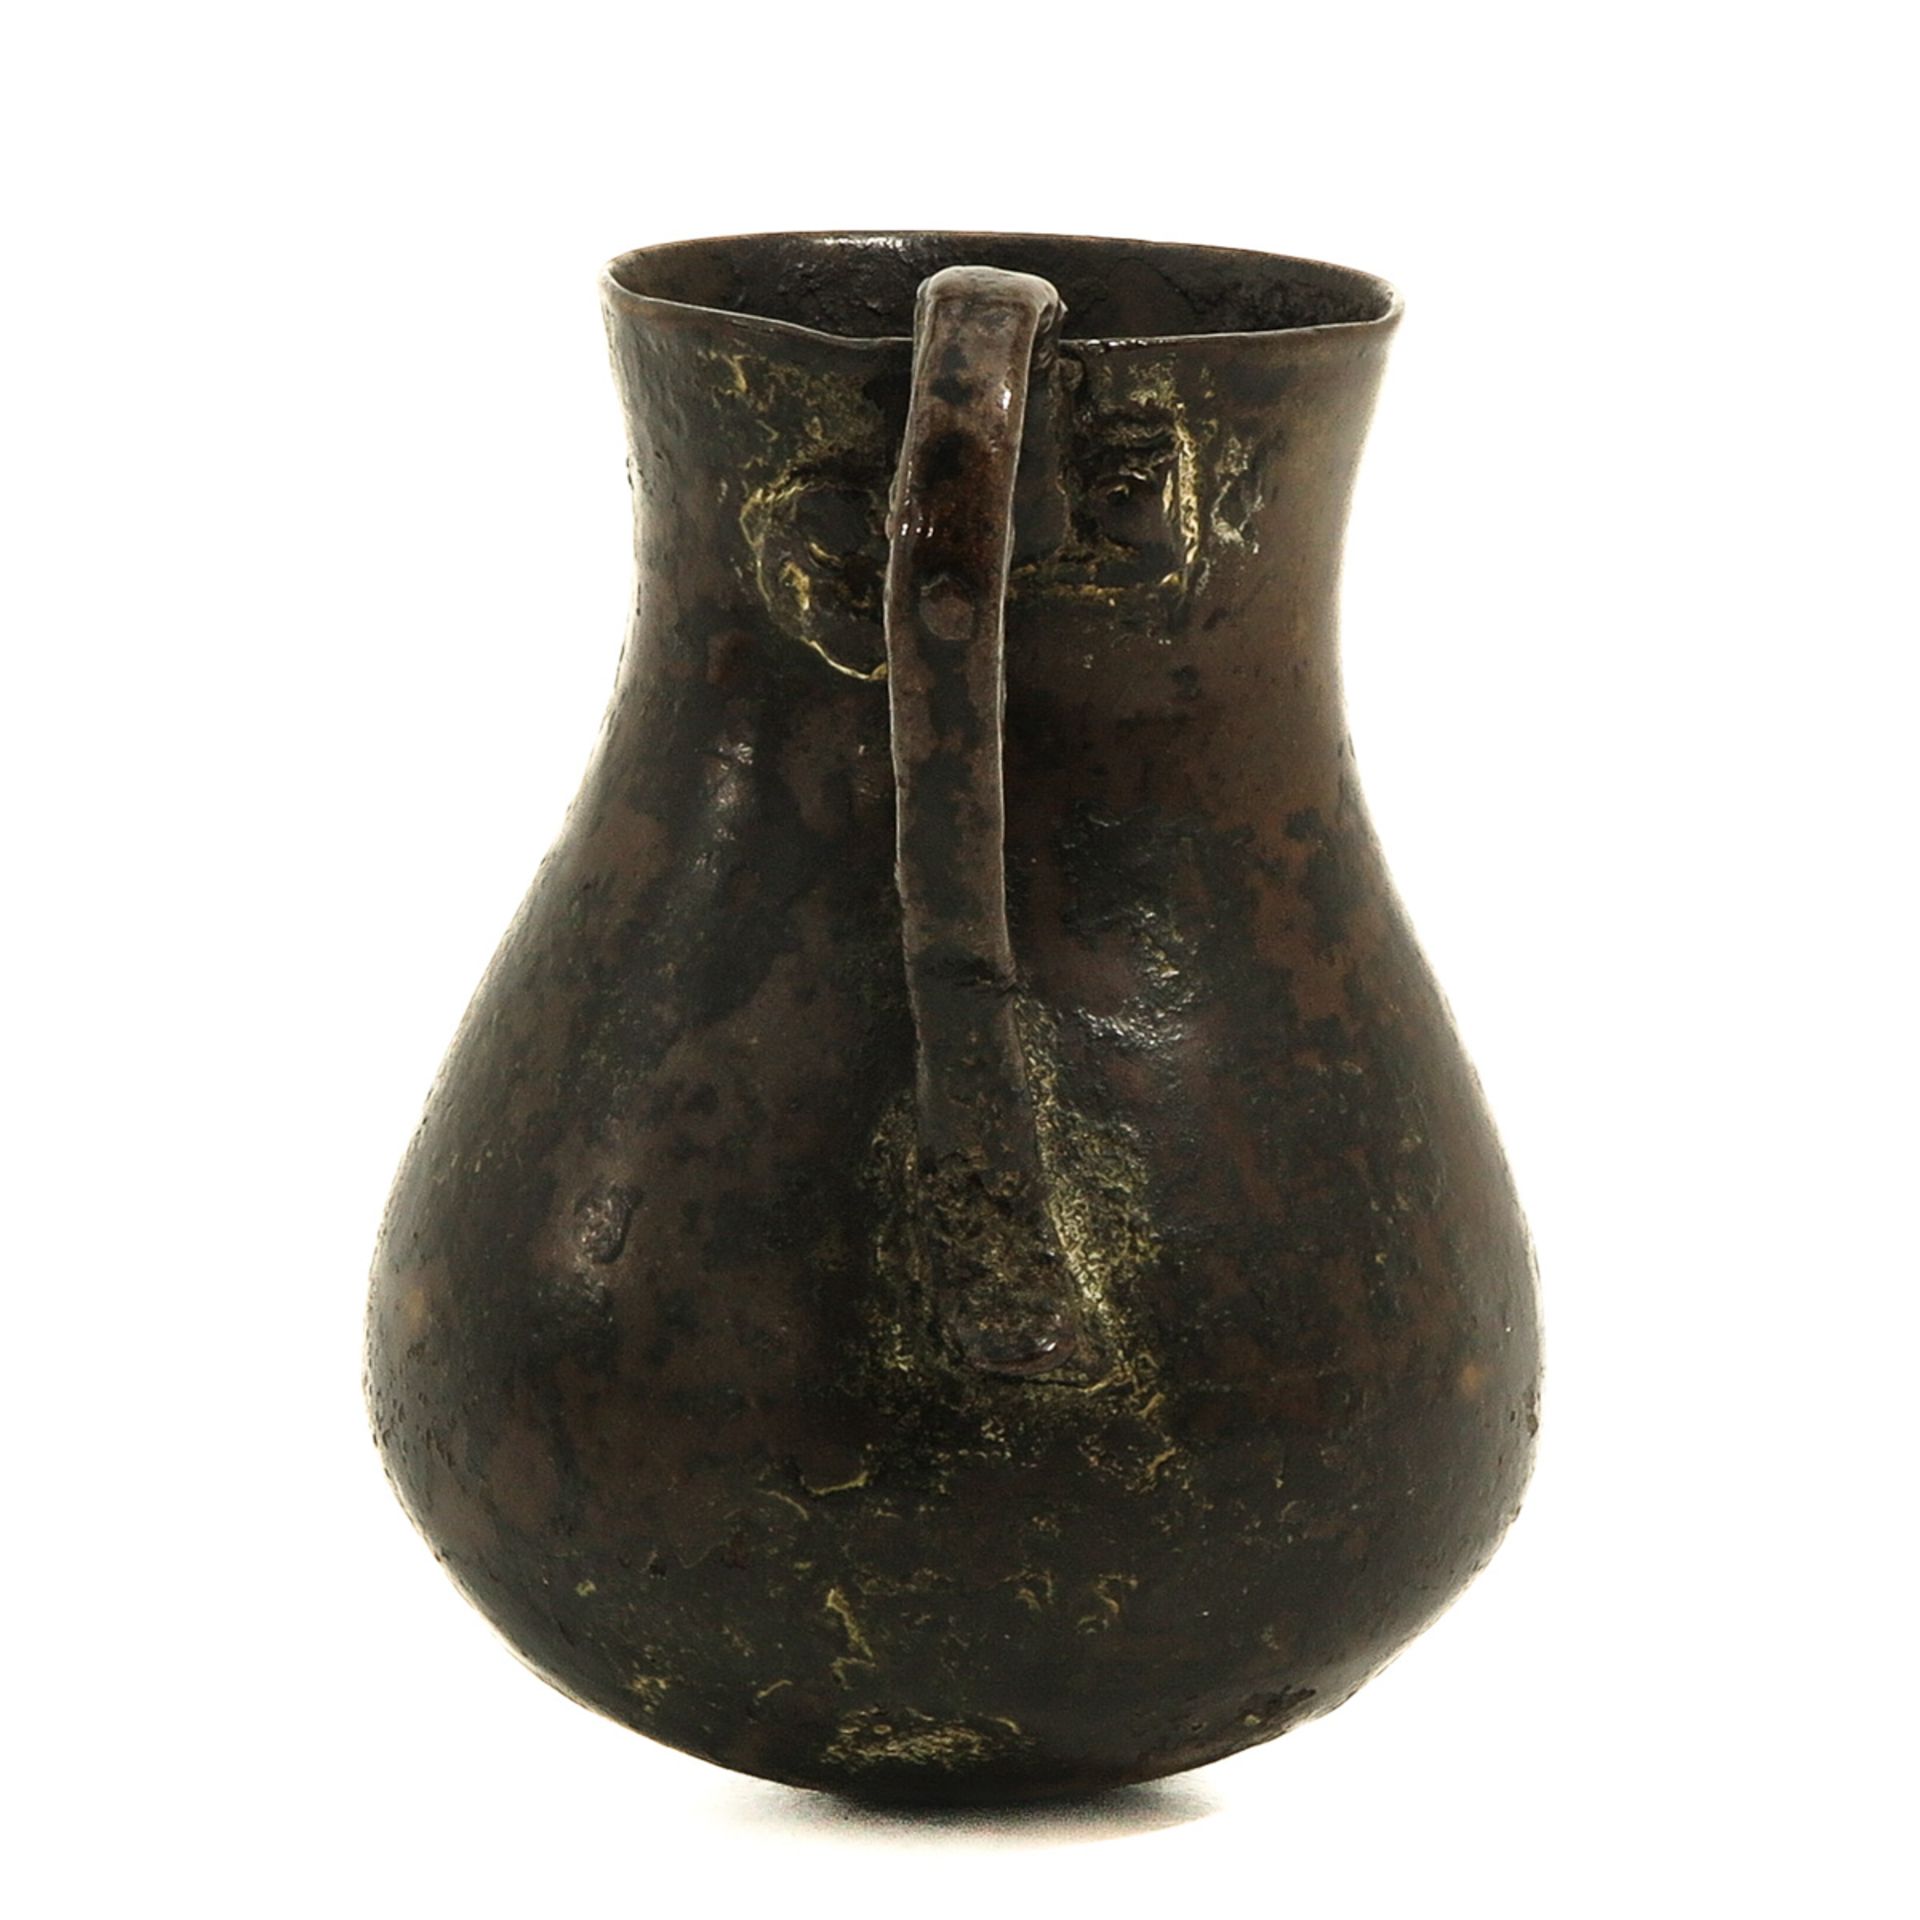 A 14th Century Bronze Measuring Cup - Image 3 of 9